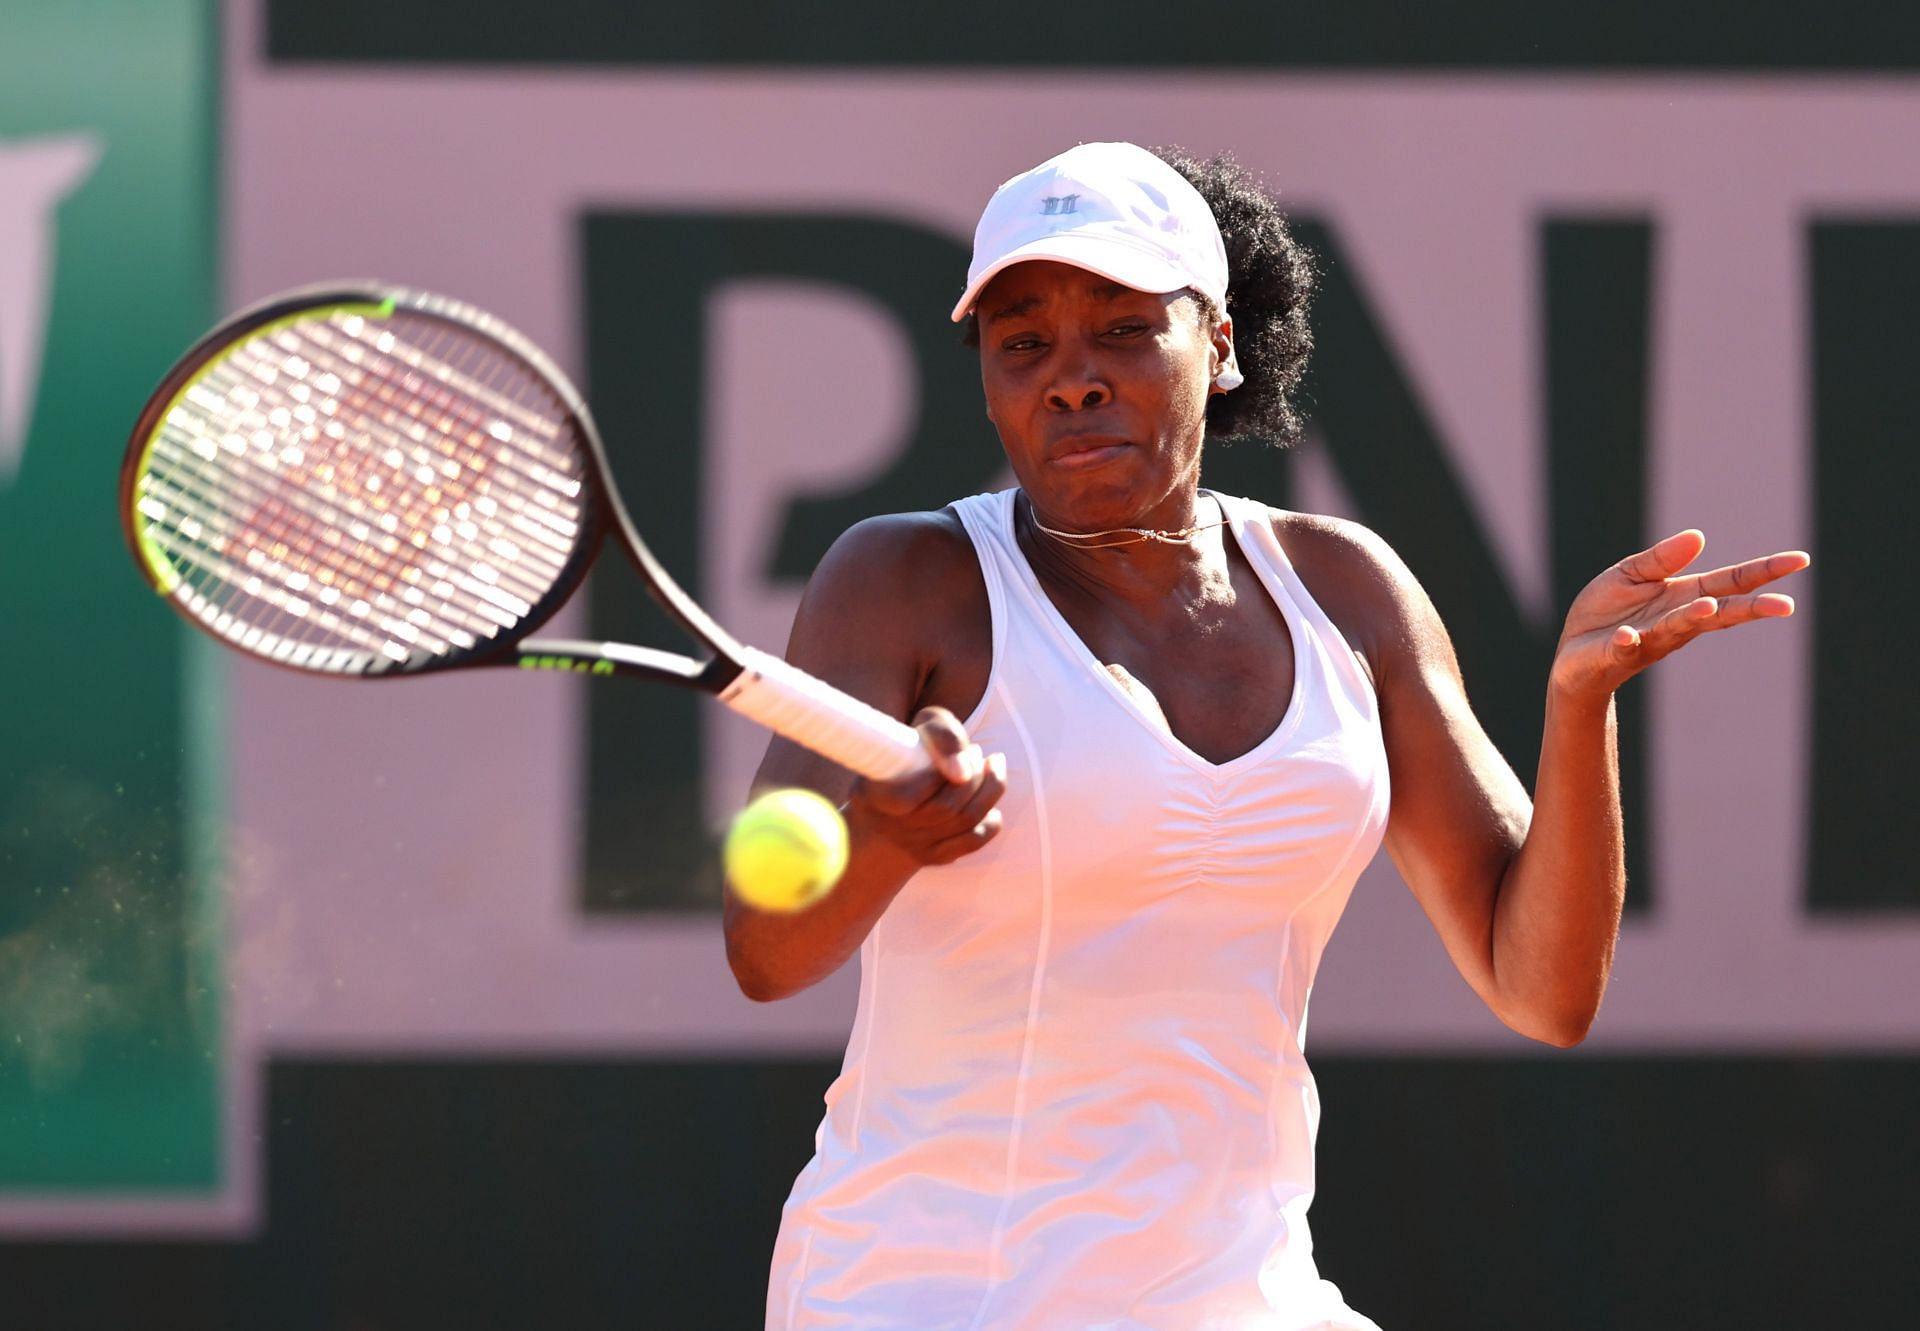 Venus Williams won her 44th singles title at the Luxembourg Open